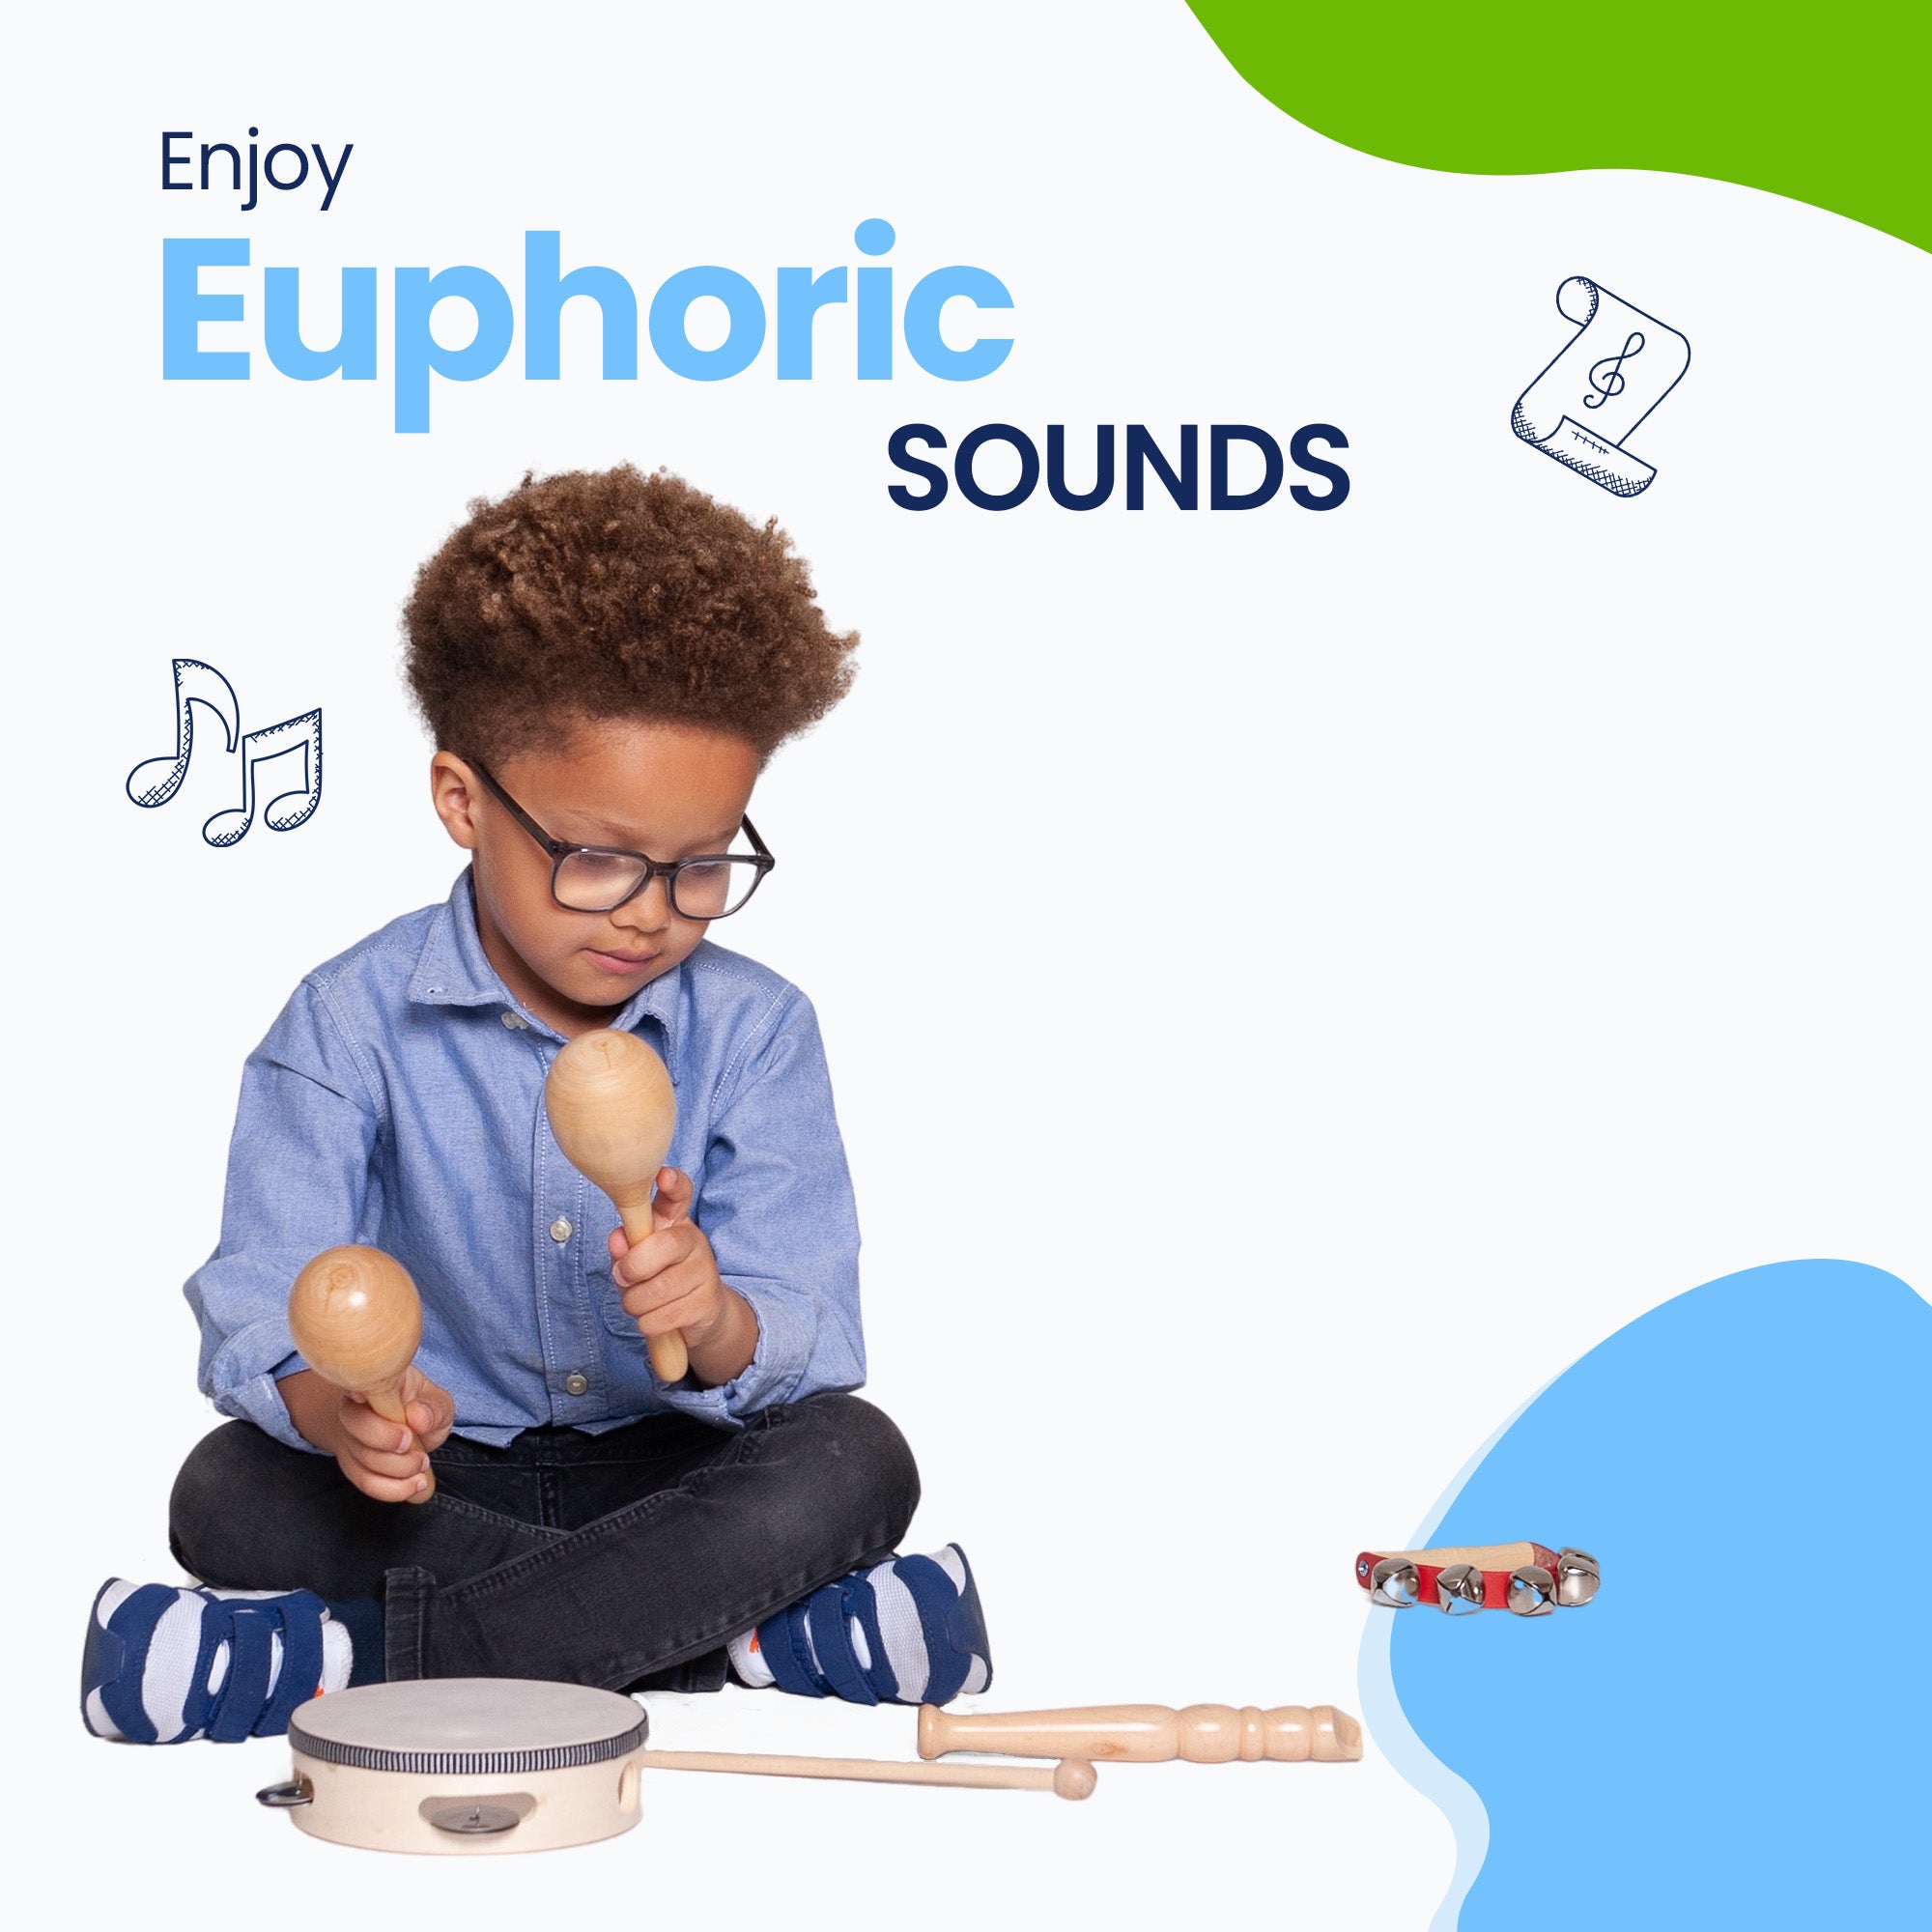 Music can bring a certain euphoria or happiness to people. Share this positive feeling with your children